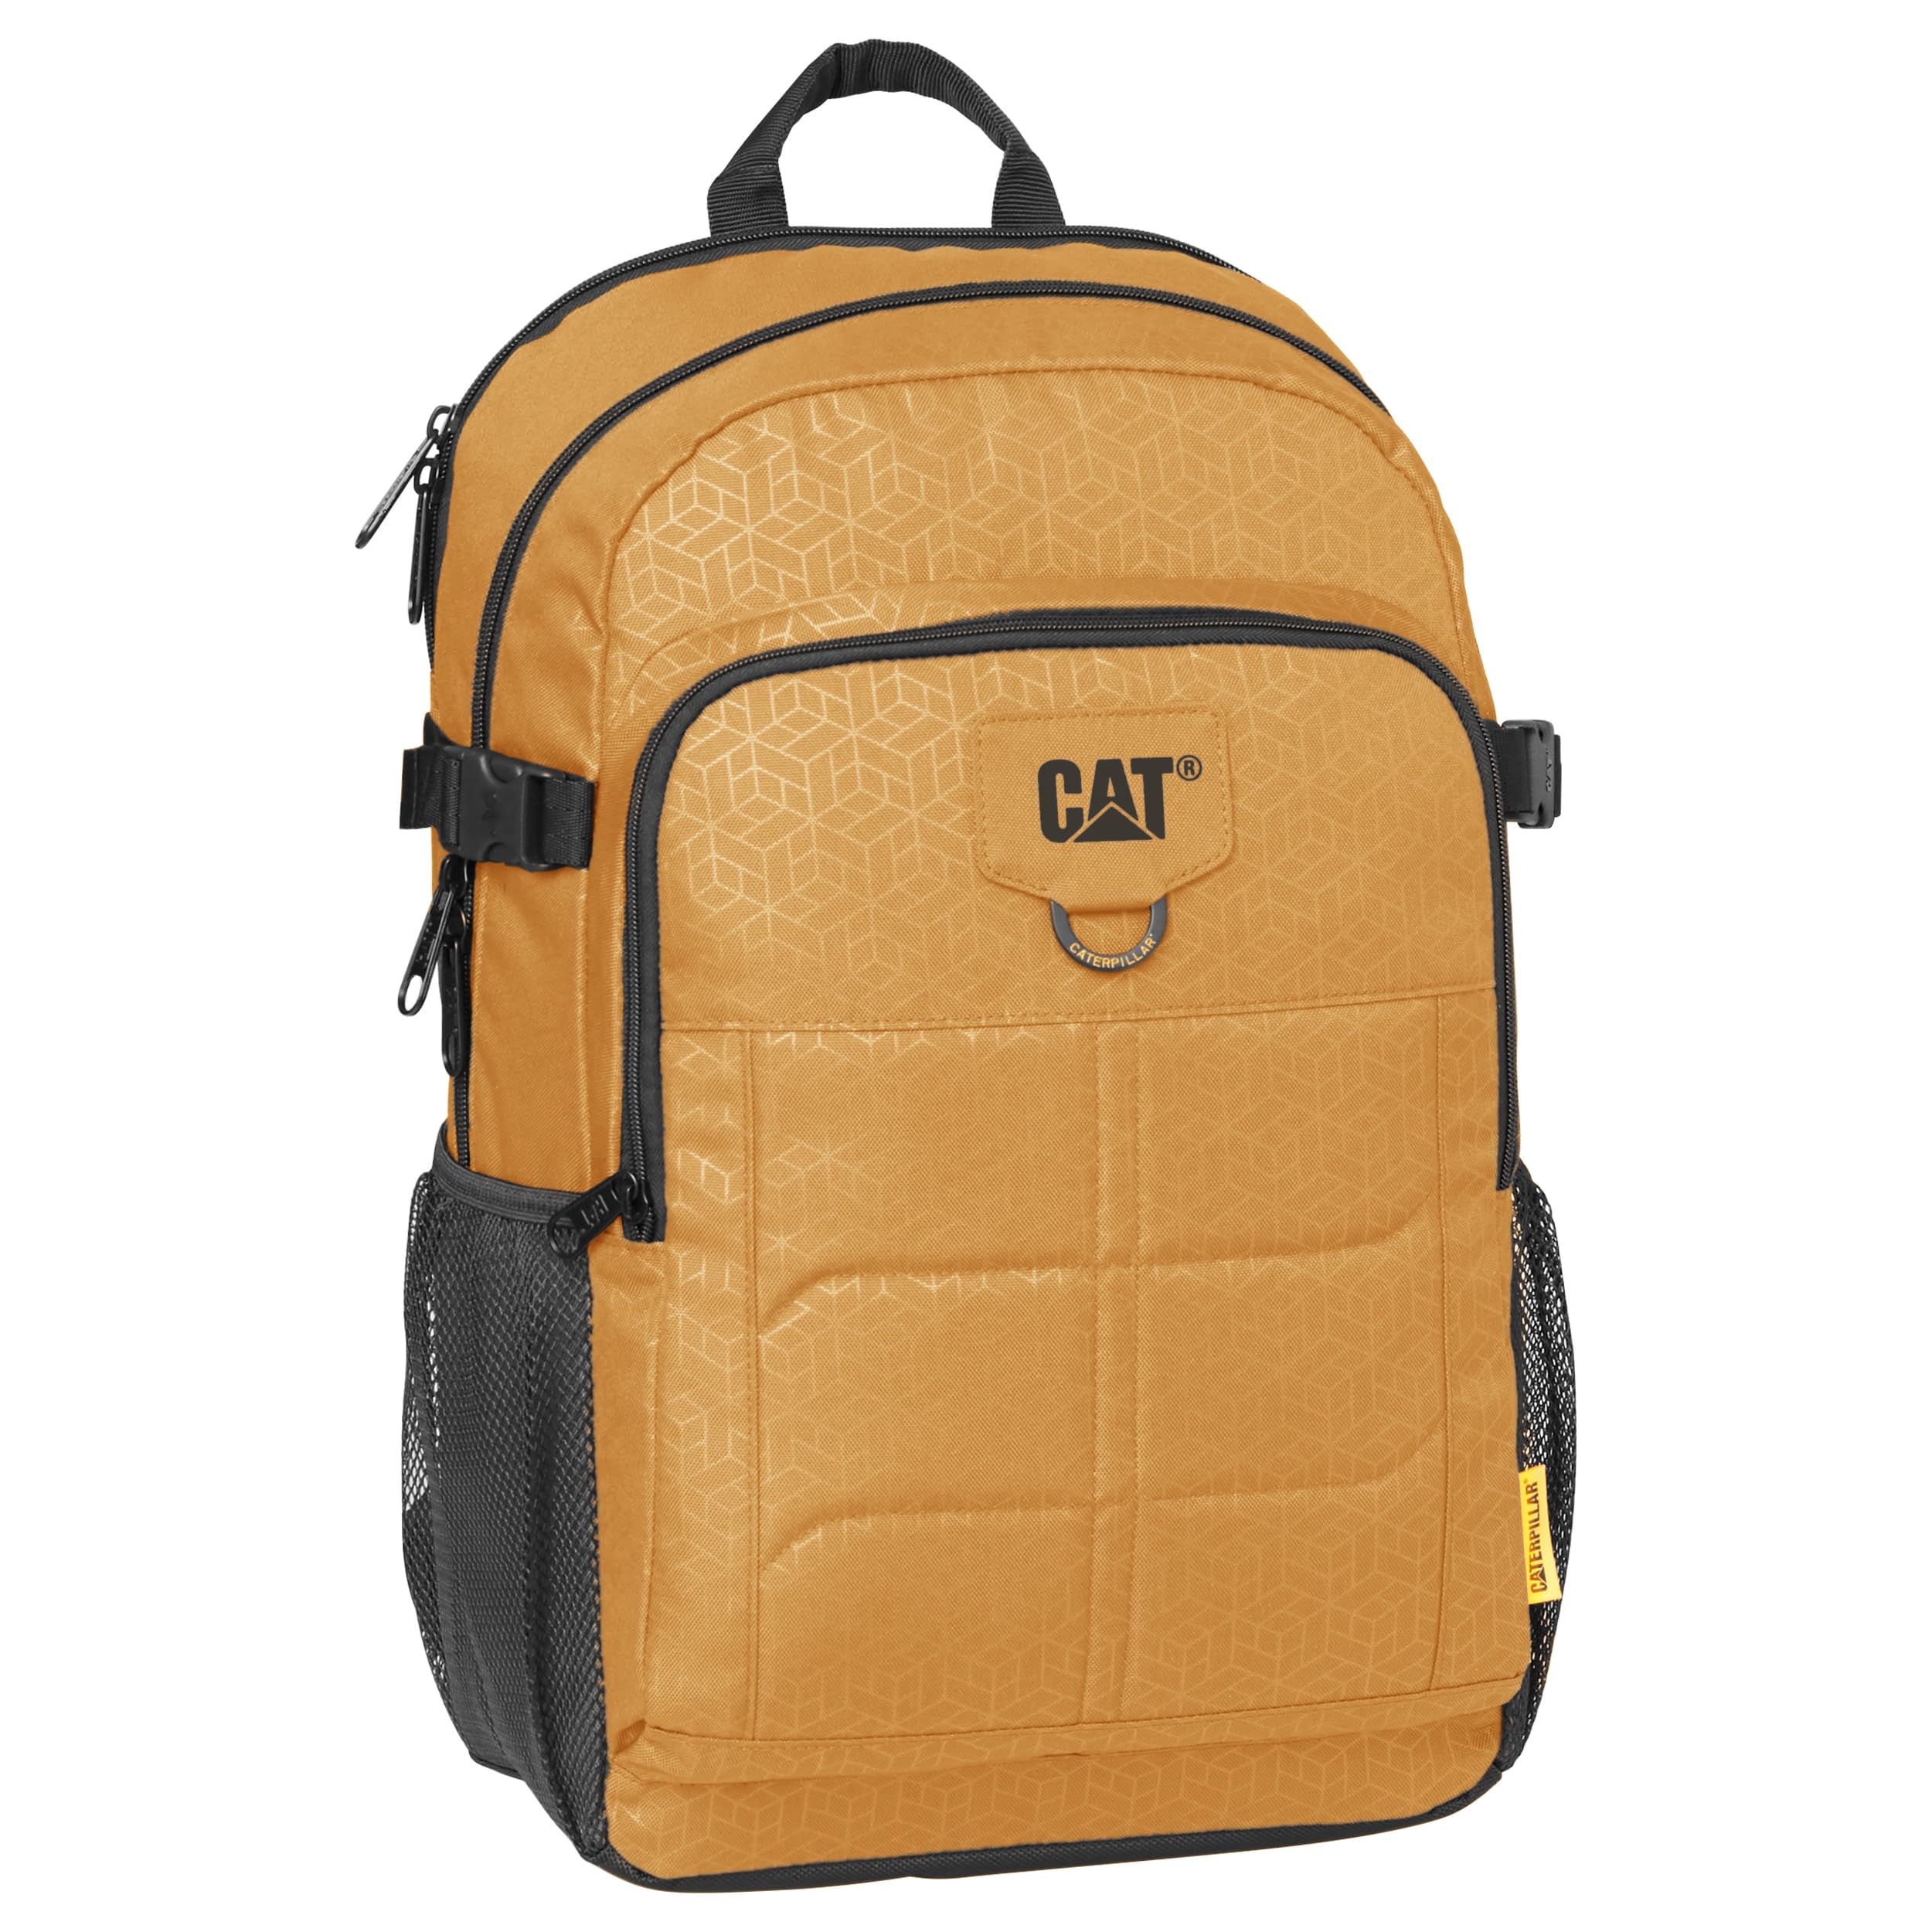 Caterpillar Men's Barry Backpack, Machine Yellow, One Size